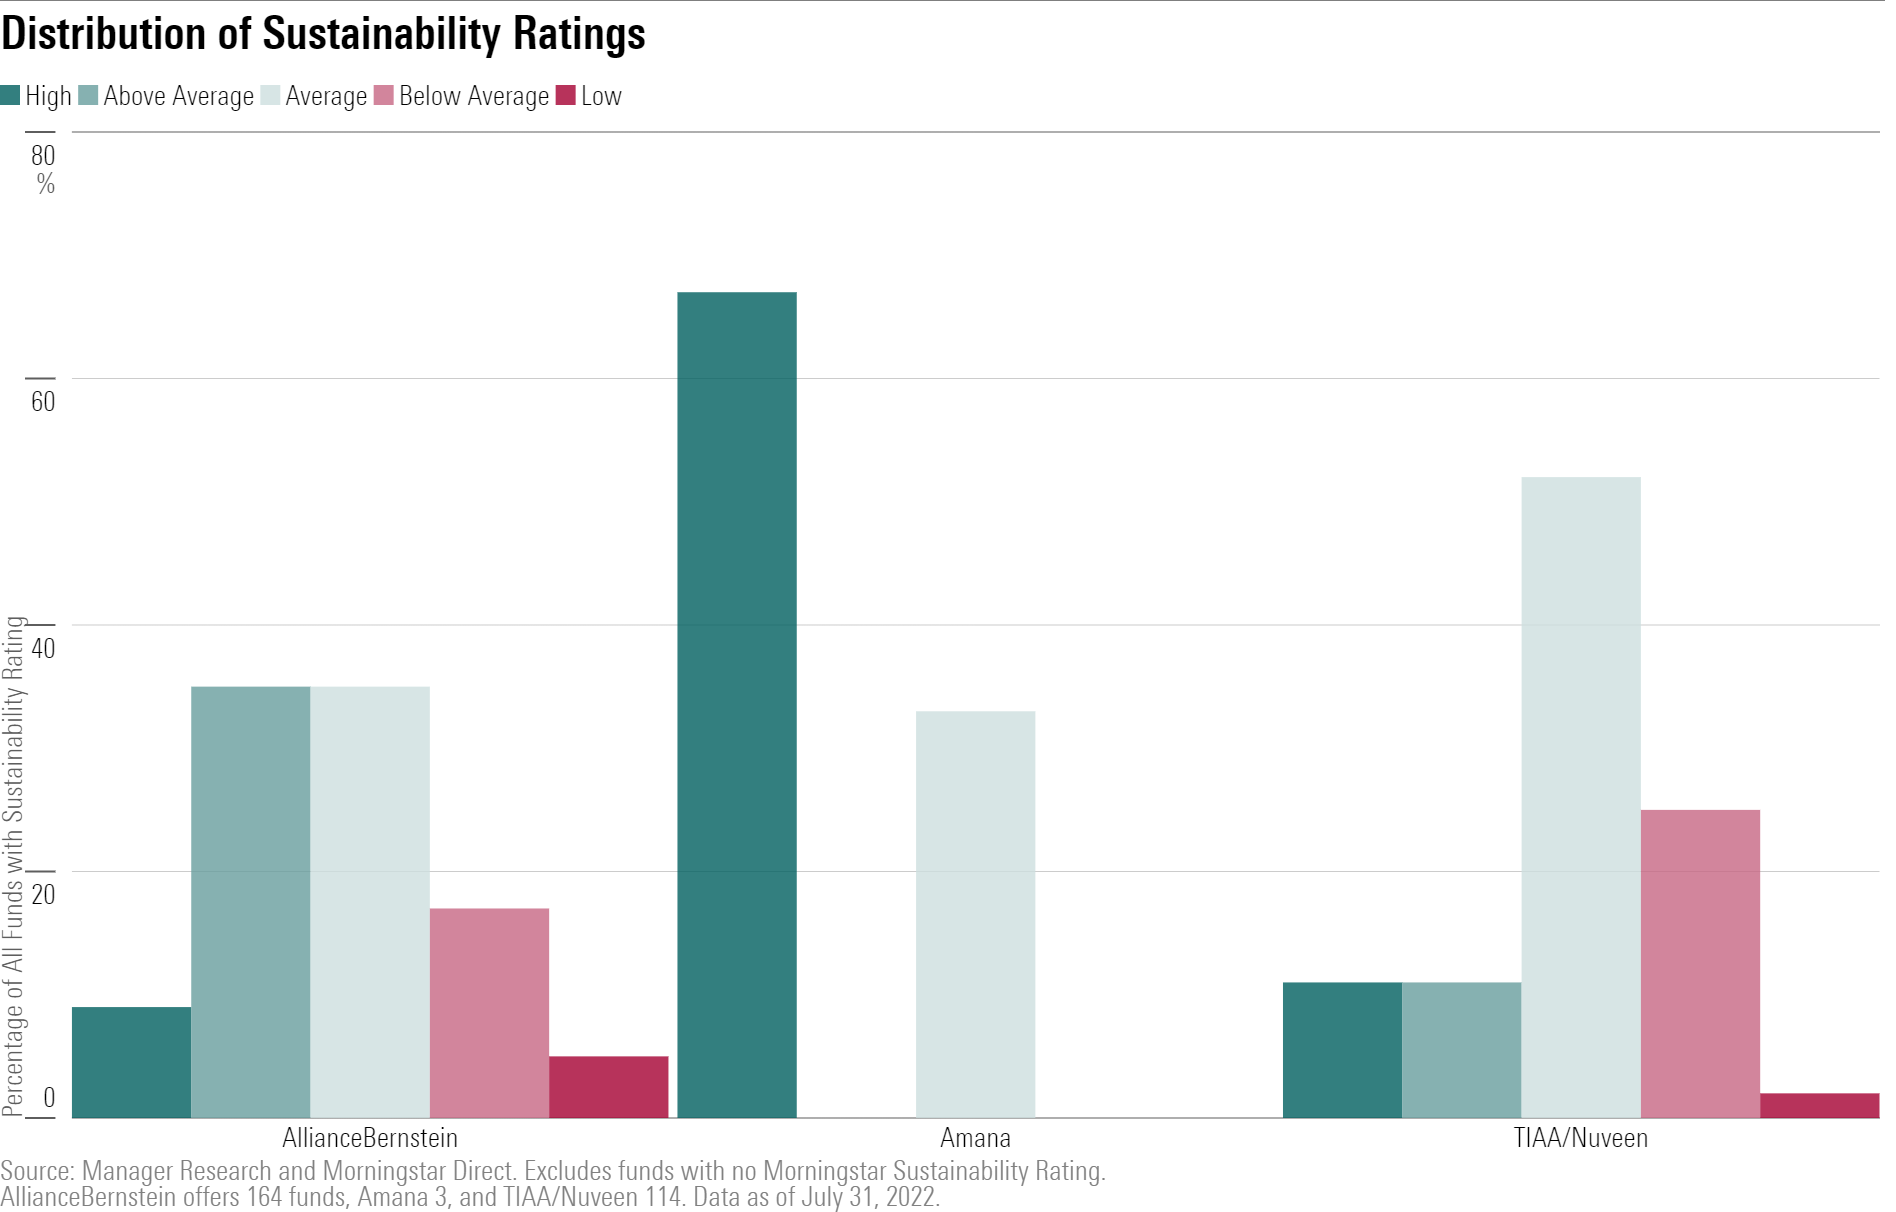 A bar chart showing the distribution of Morningstar Sustainability Ratings for AllianceBernstein, Amana, and TIAA/Nuveen.